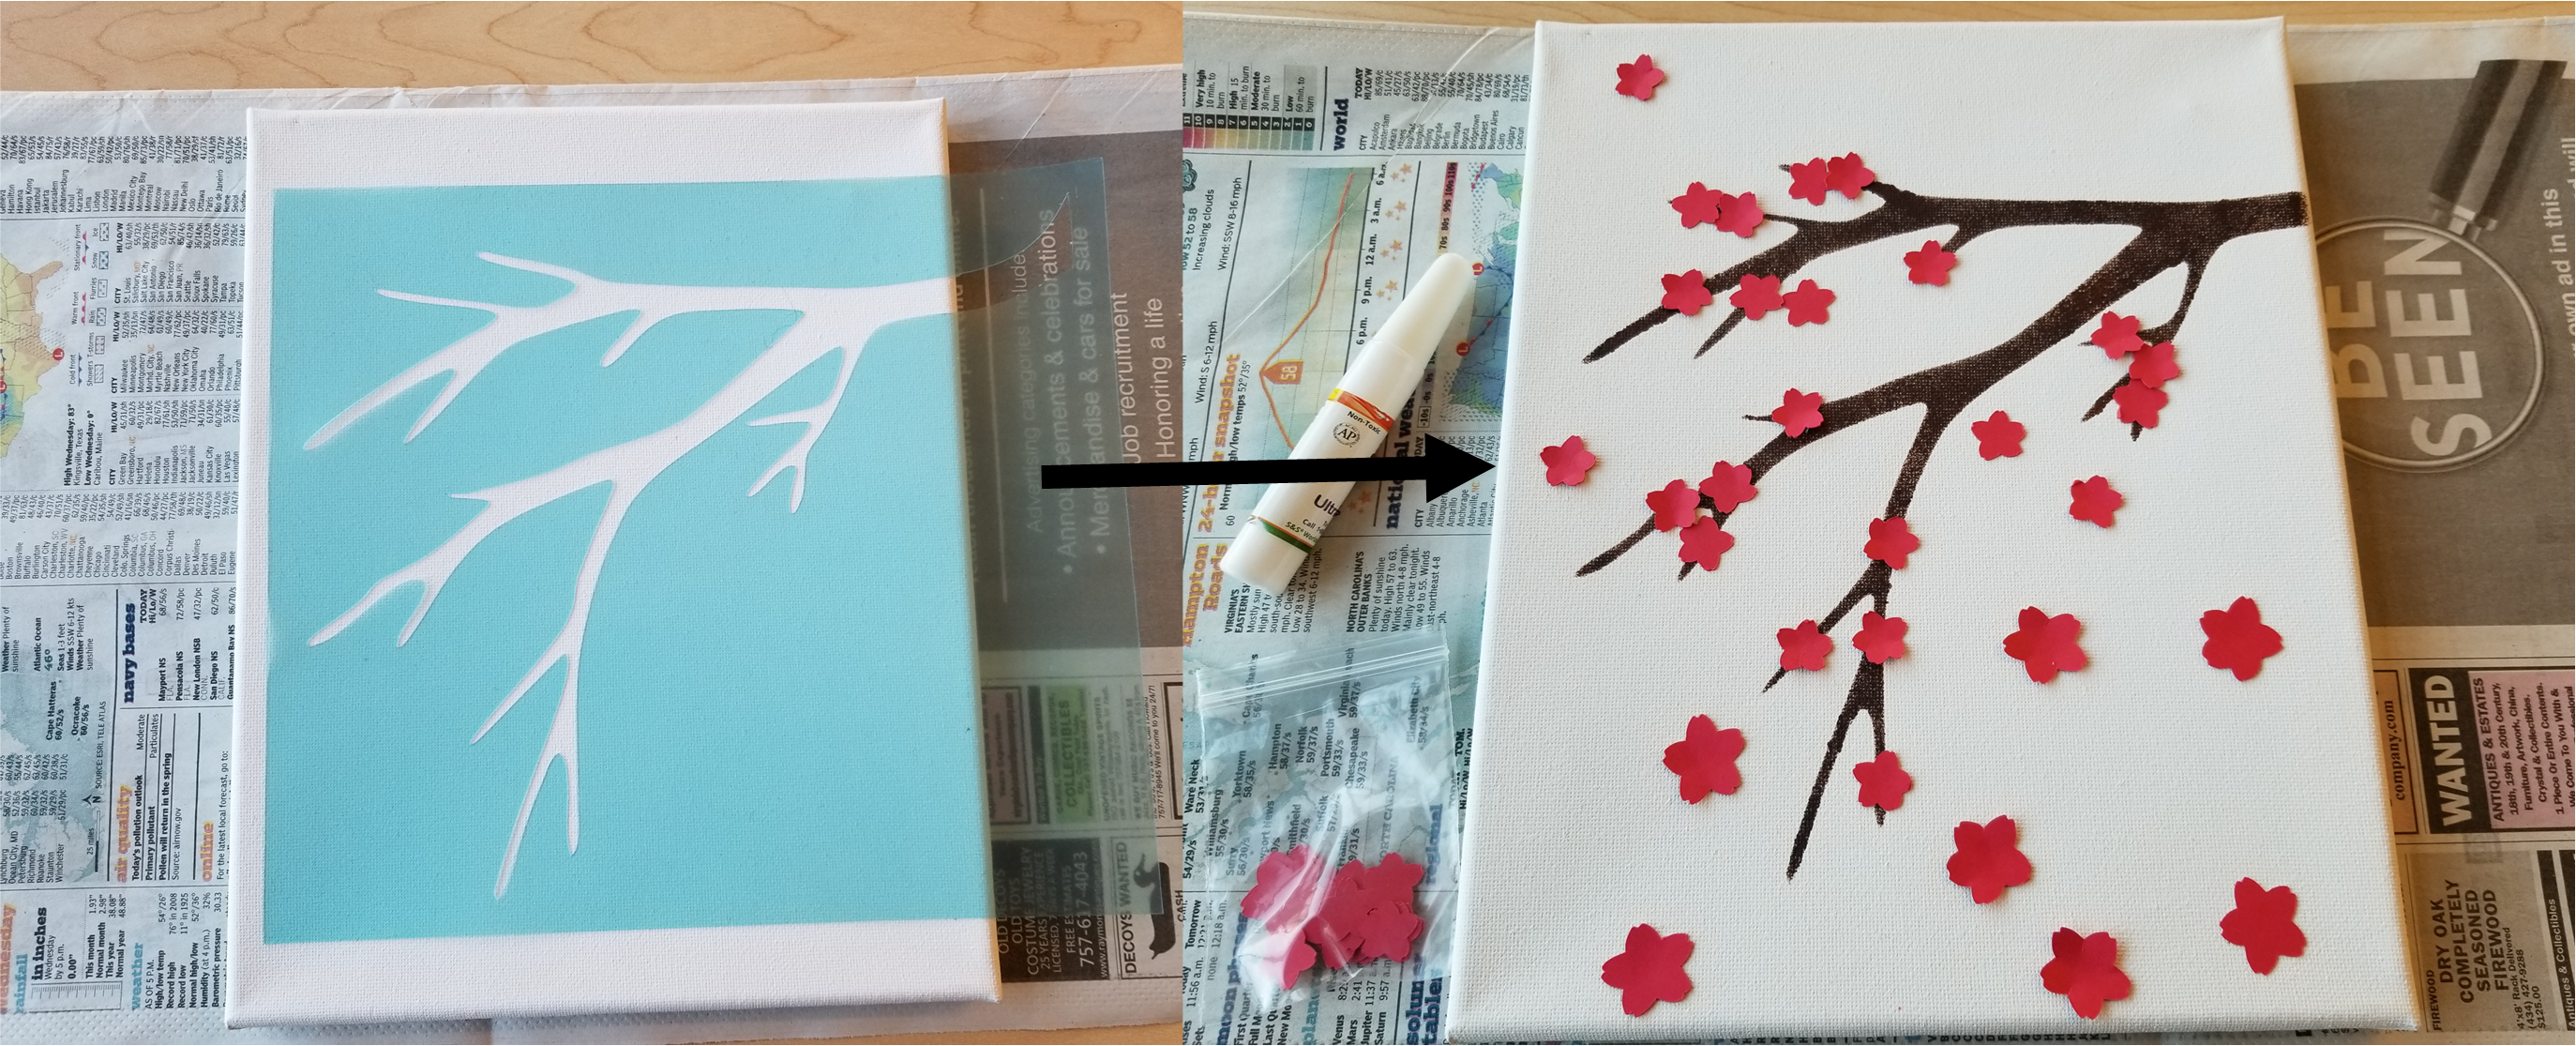 Before and after picture of completed project. Branches stencil positioned on blank white canvas on the left. Painted brown branches with red cherry blossom petals on the right after picture.